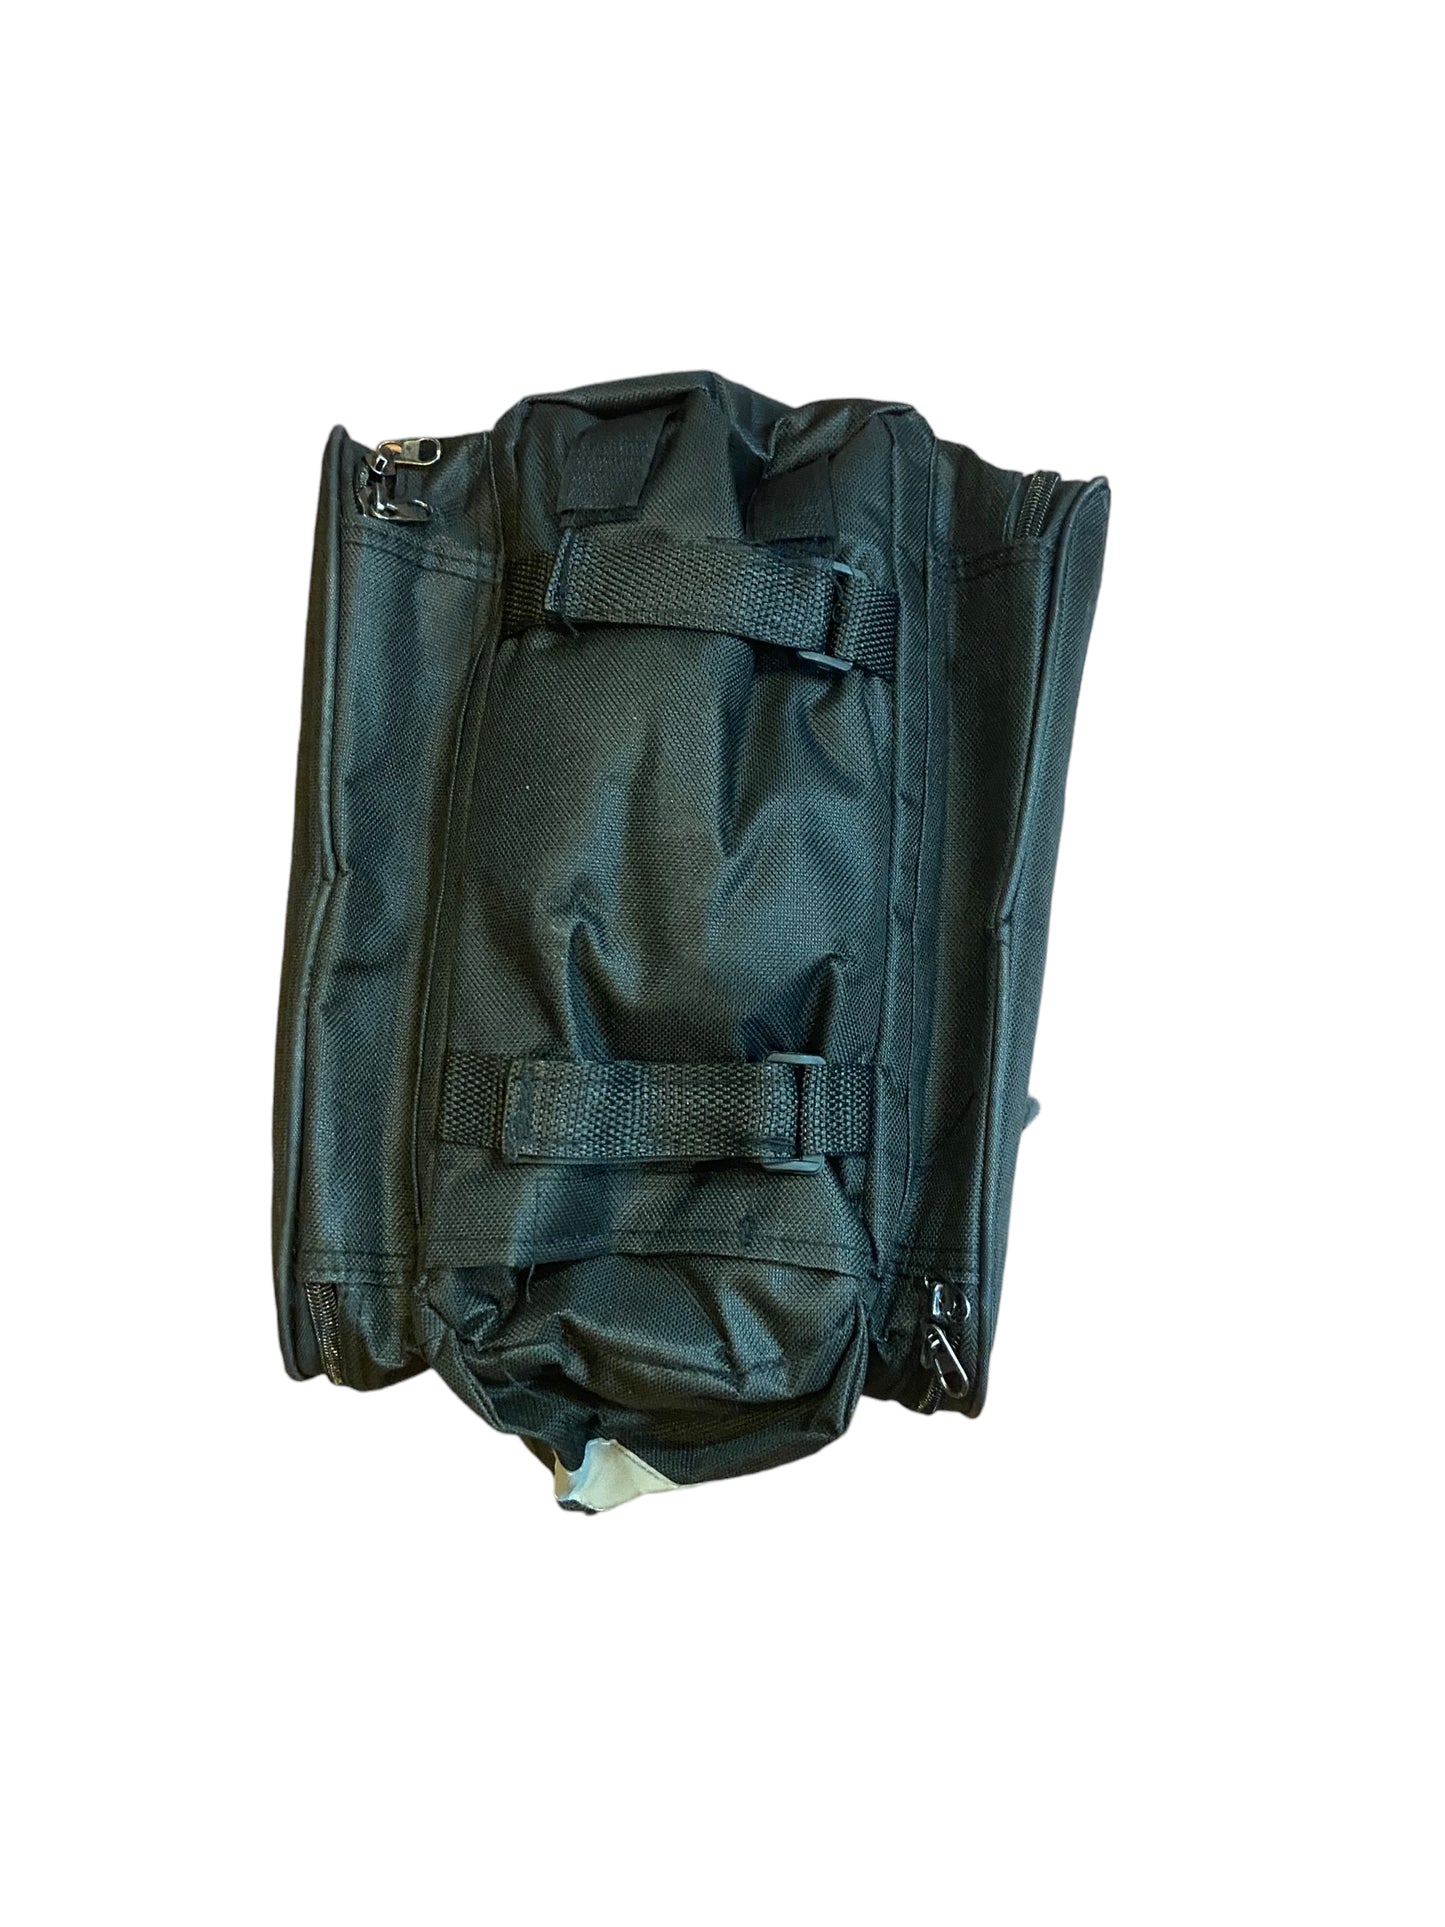 BICYCLE BAG REMOVABLE CARRIER FOR REAR RACK